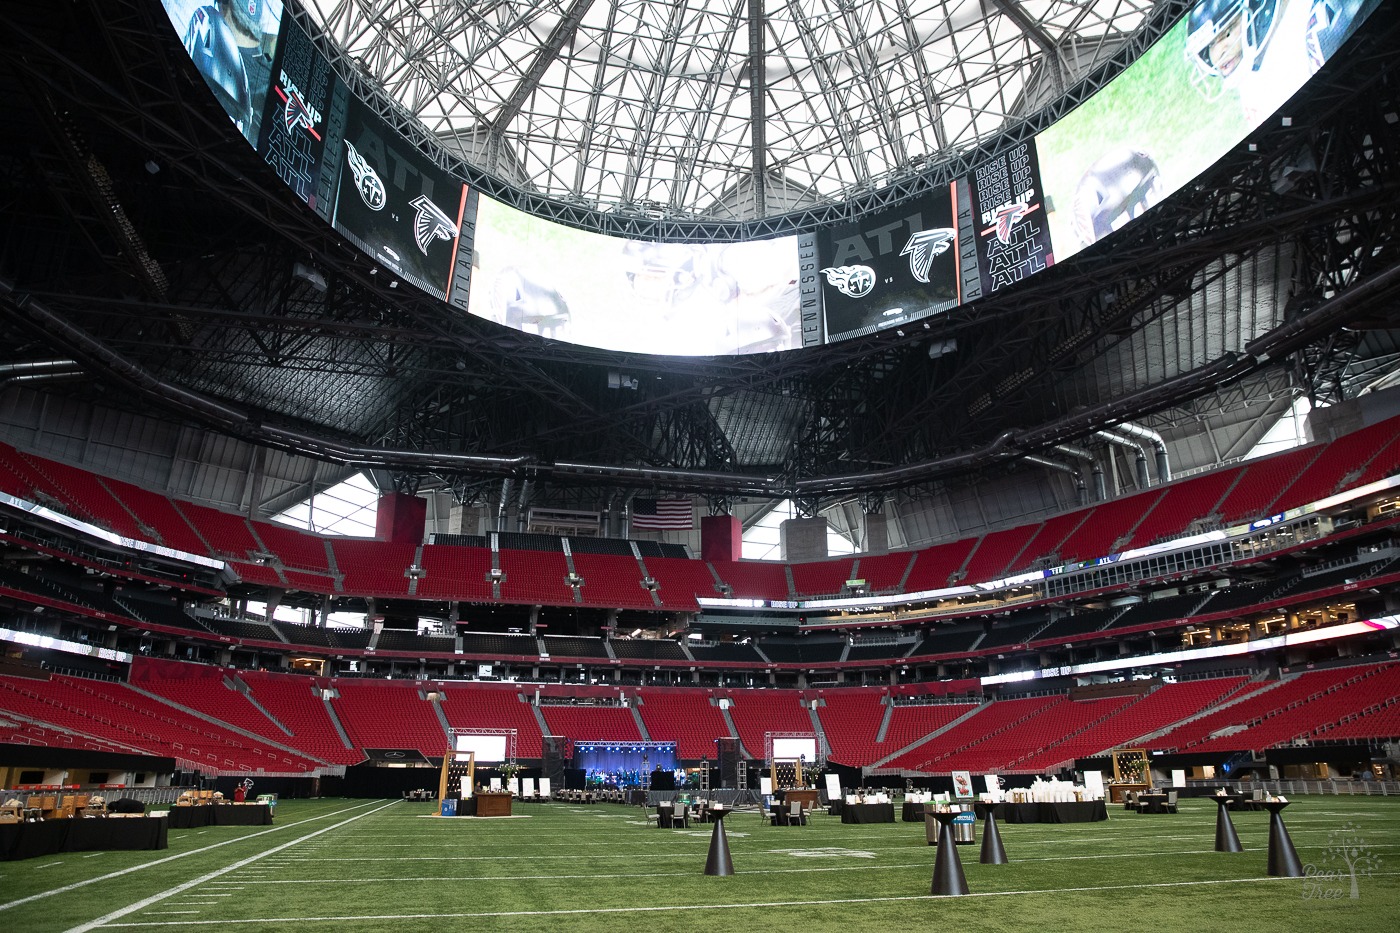 Atlanta Mercedes Benz stadium set up for Covenant House Georgia's Night of Broadway Stars on the field before guests arrive